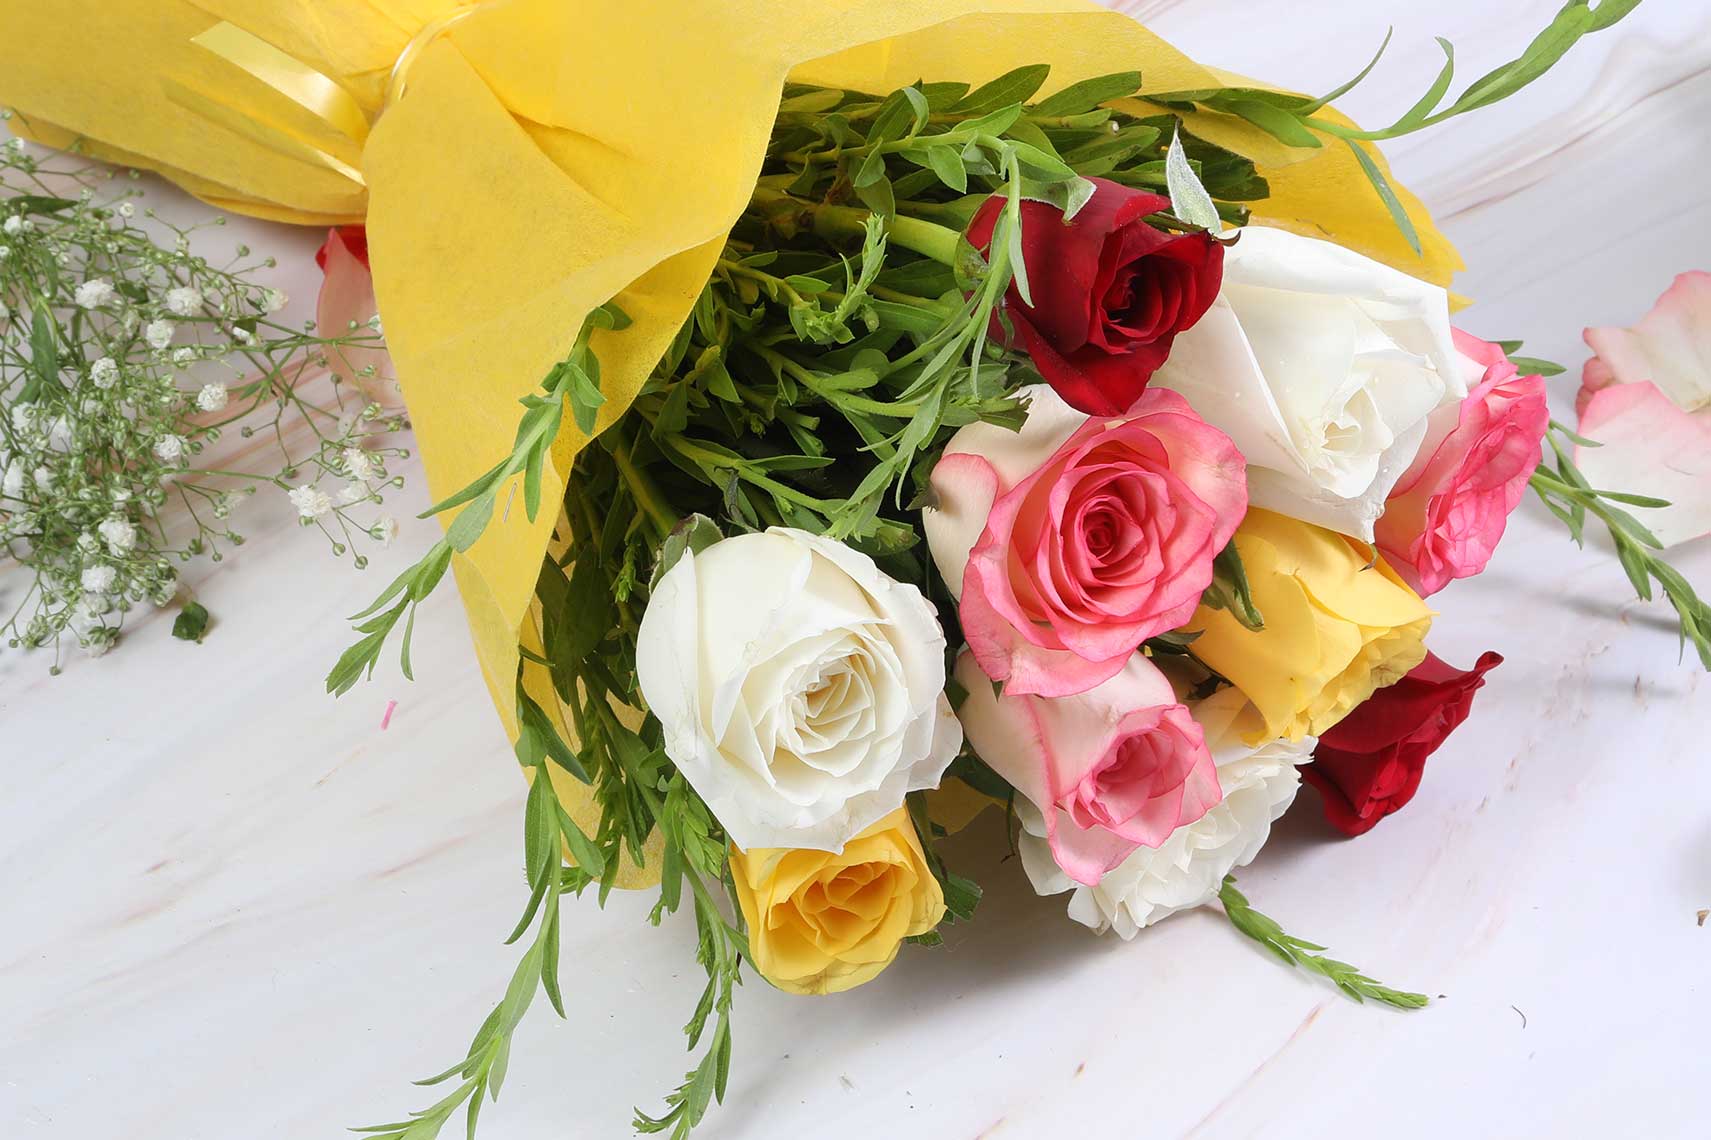 Bunch of 10 Mixed Roses - Buy Online Send Now